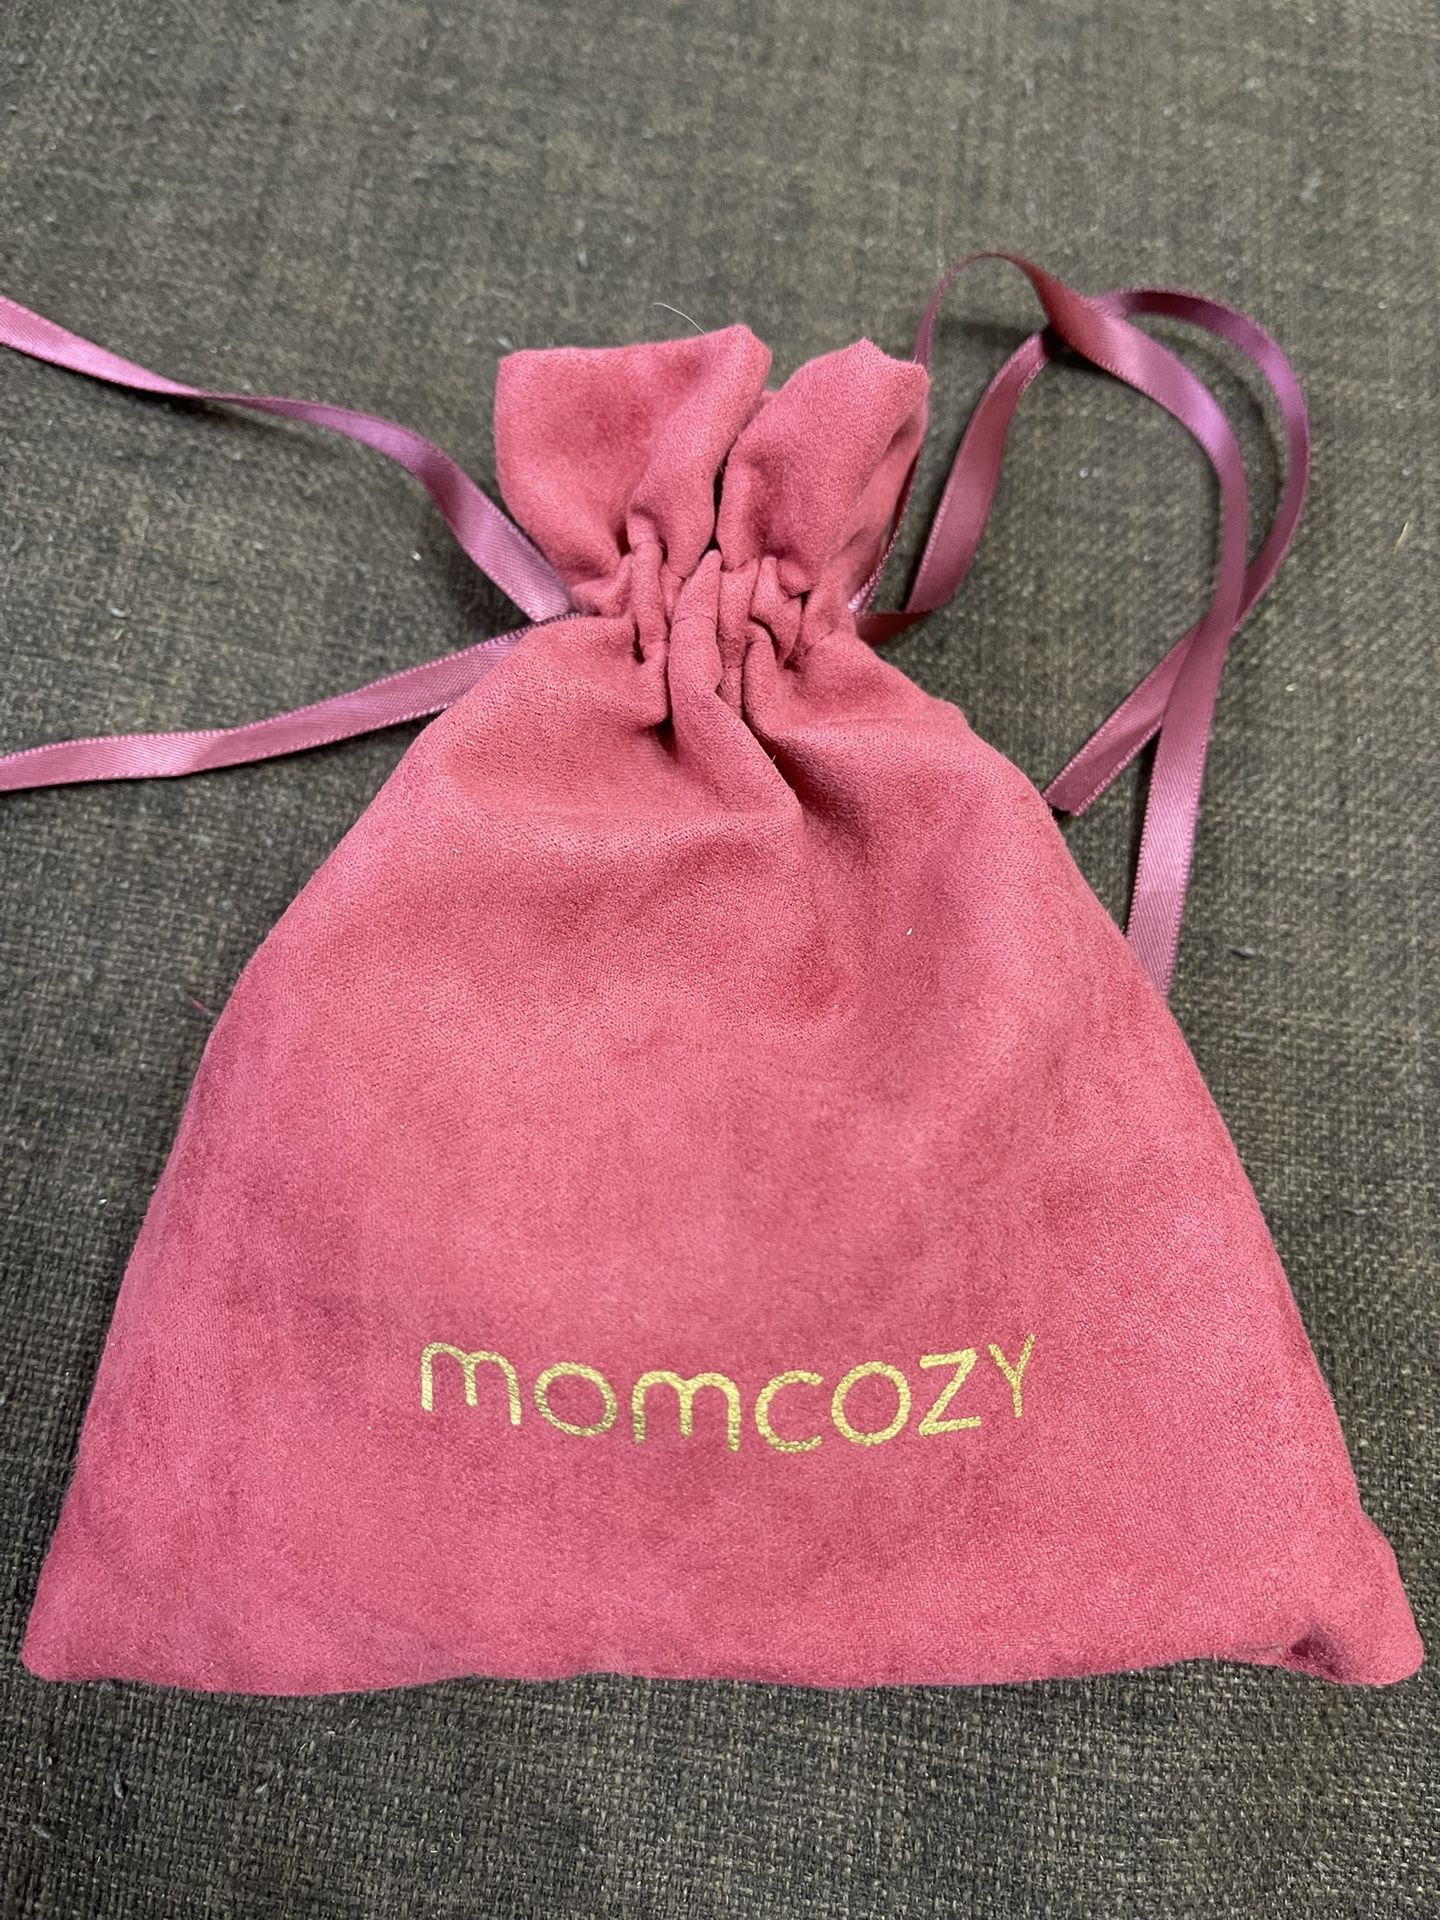 Momcozy Warming Lactation Massager 2-in-1, Soft Breast Massager